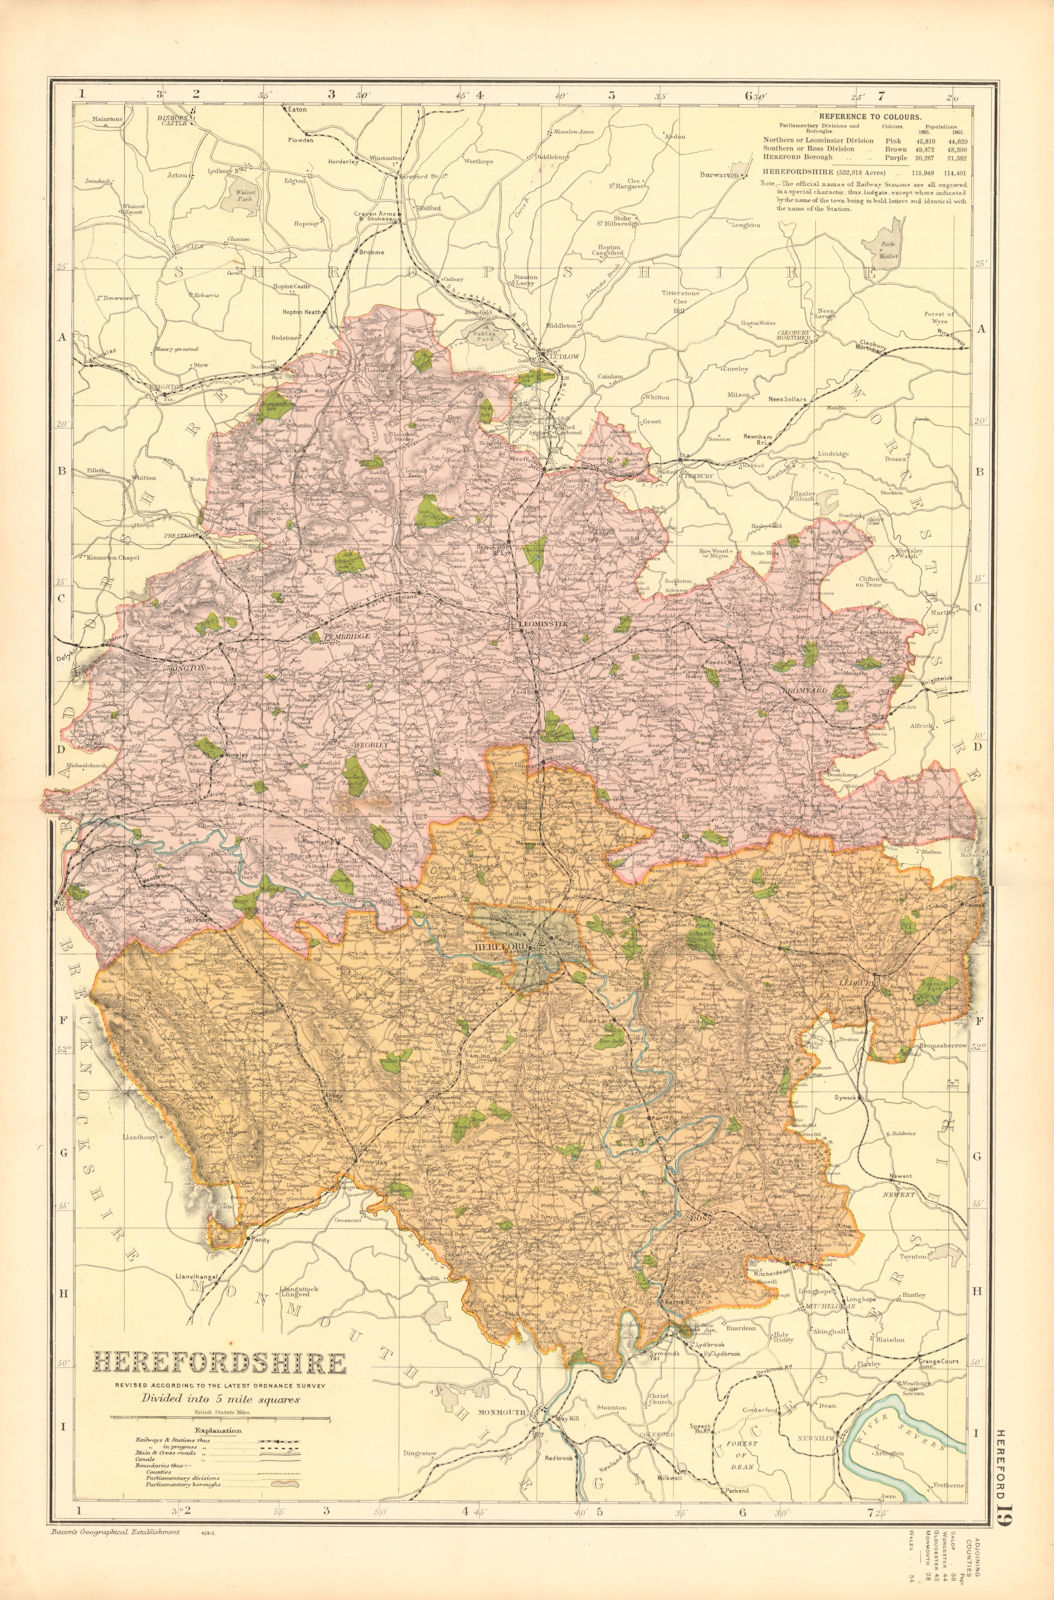 HEREFORDSHIRE. Showing Parliamentary divisions, boroughs & parks. BACON 1904 map